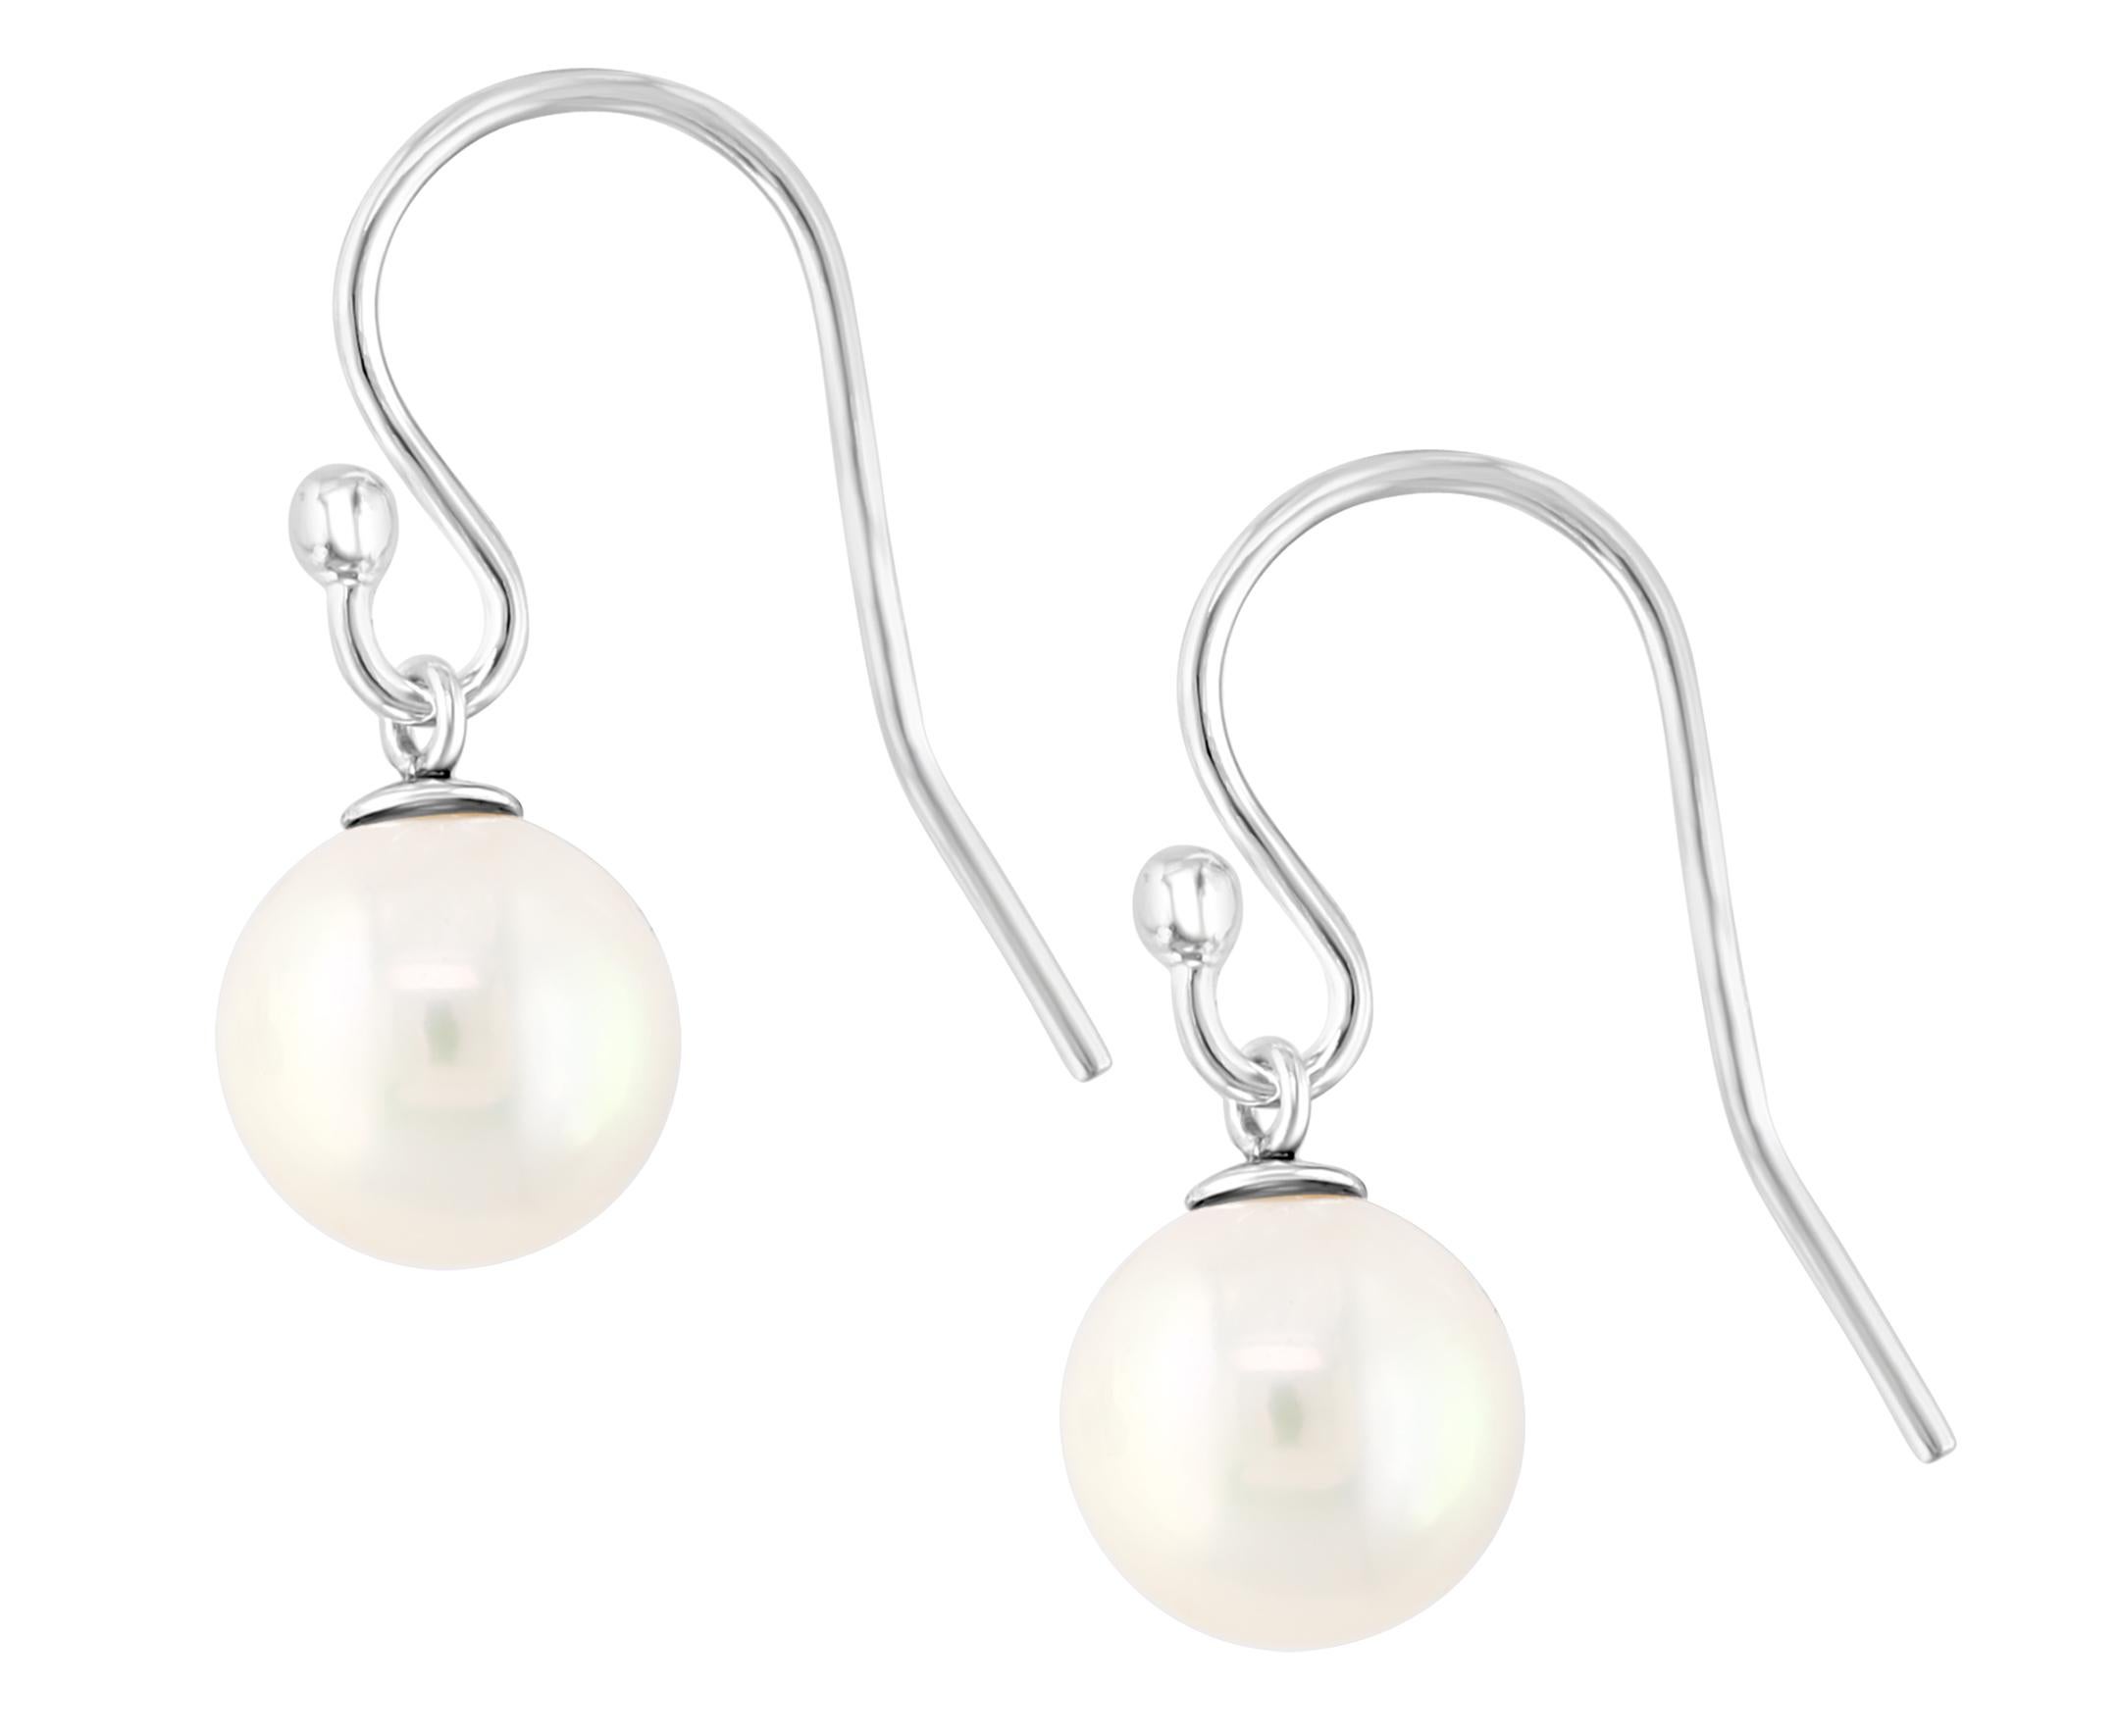 These beautiful earrings feature cultured freshwater, white round pearls measuring 7.5-8mm. The pearls dangle beneath sterling silver ear wires.  Simple, yet elegant, this style is an essential for any collection.
AN ELEGANT EXPRESSION – This